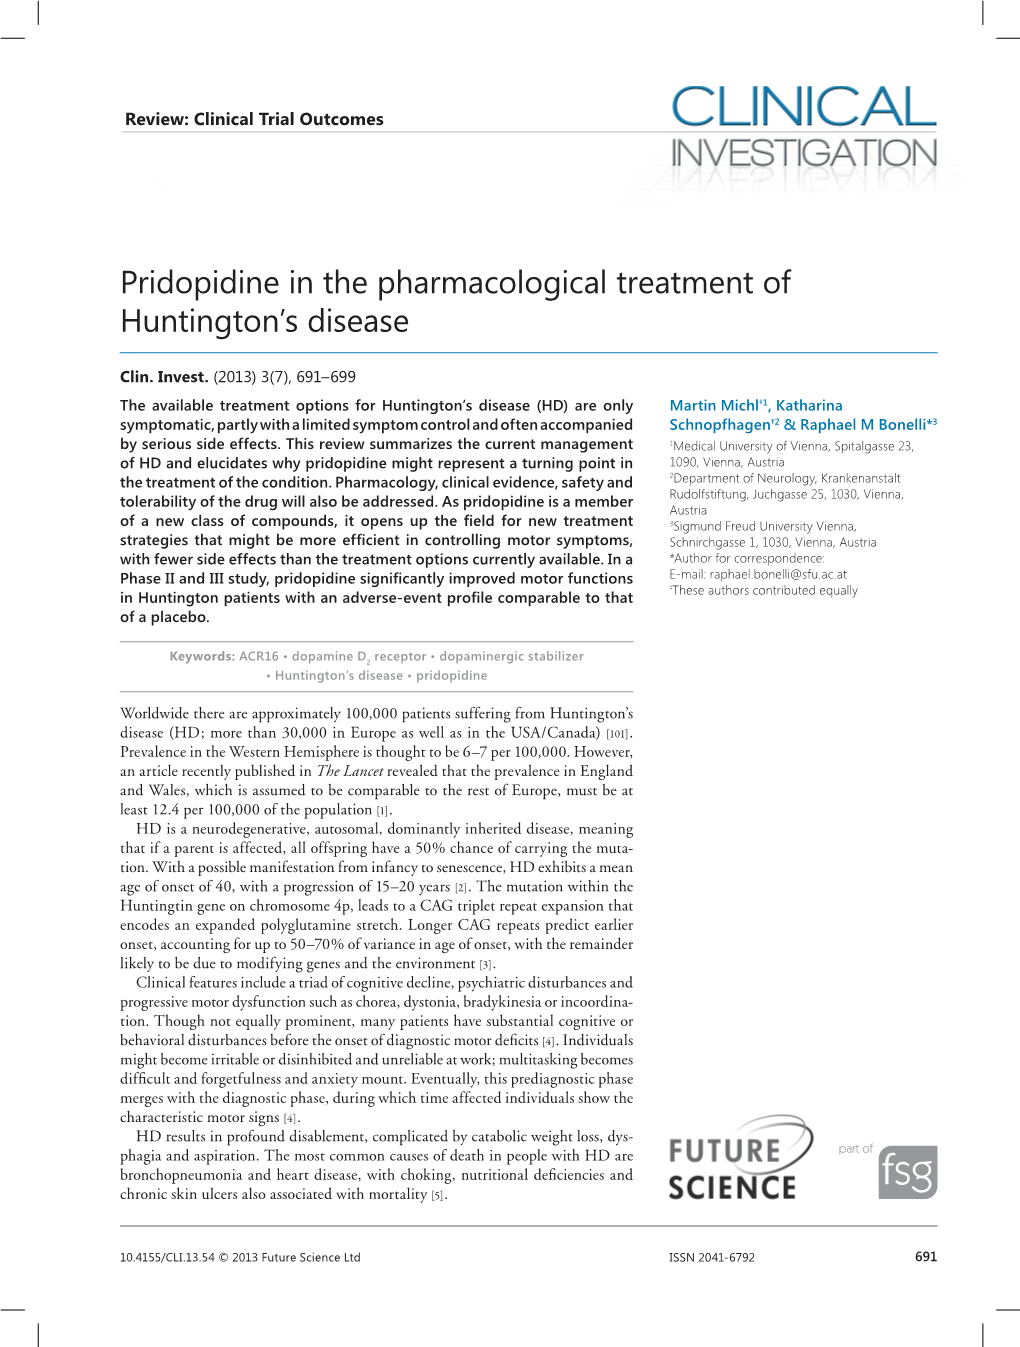 Pridopidine in the Pharmacological Treatment of Huntington's Disease